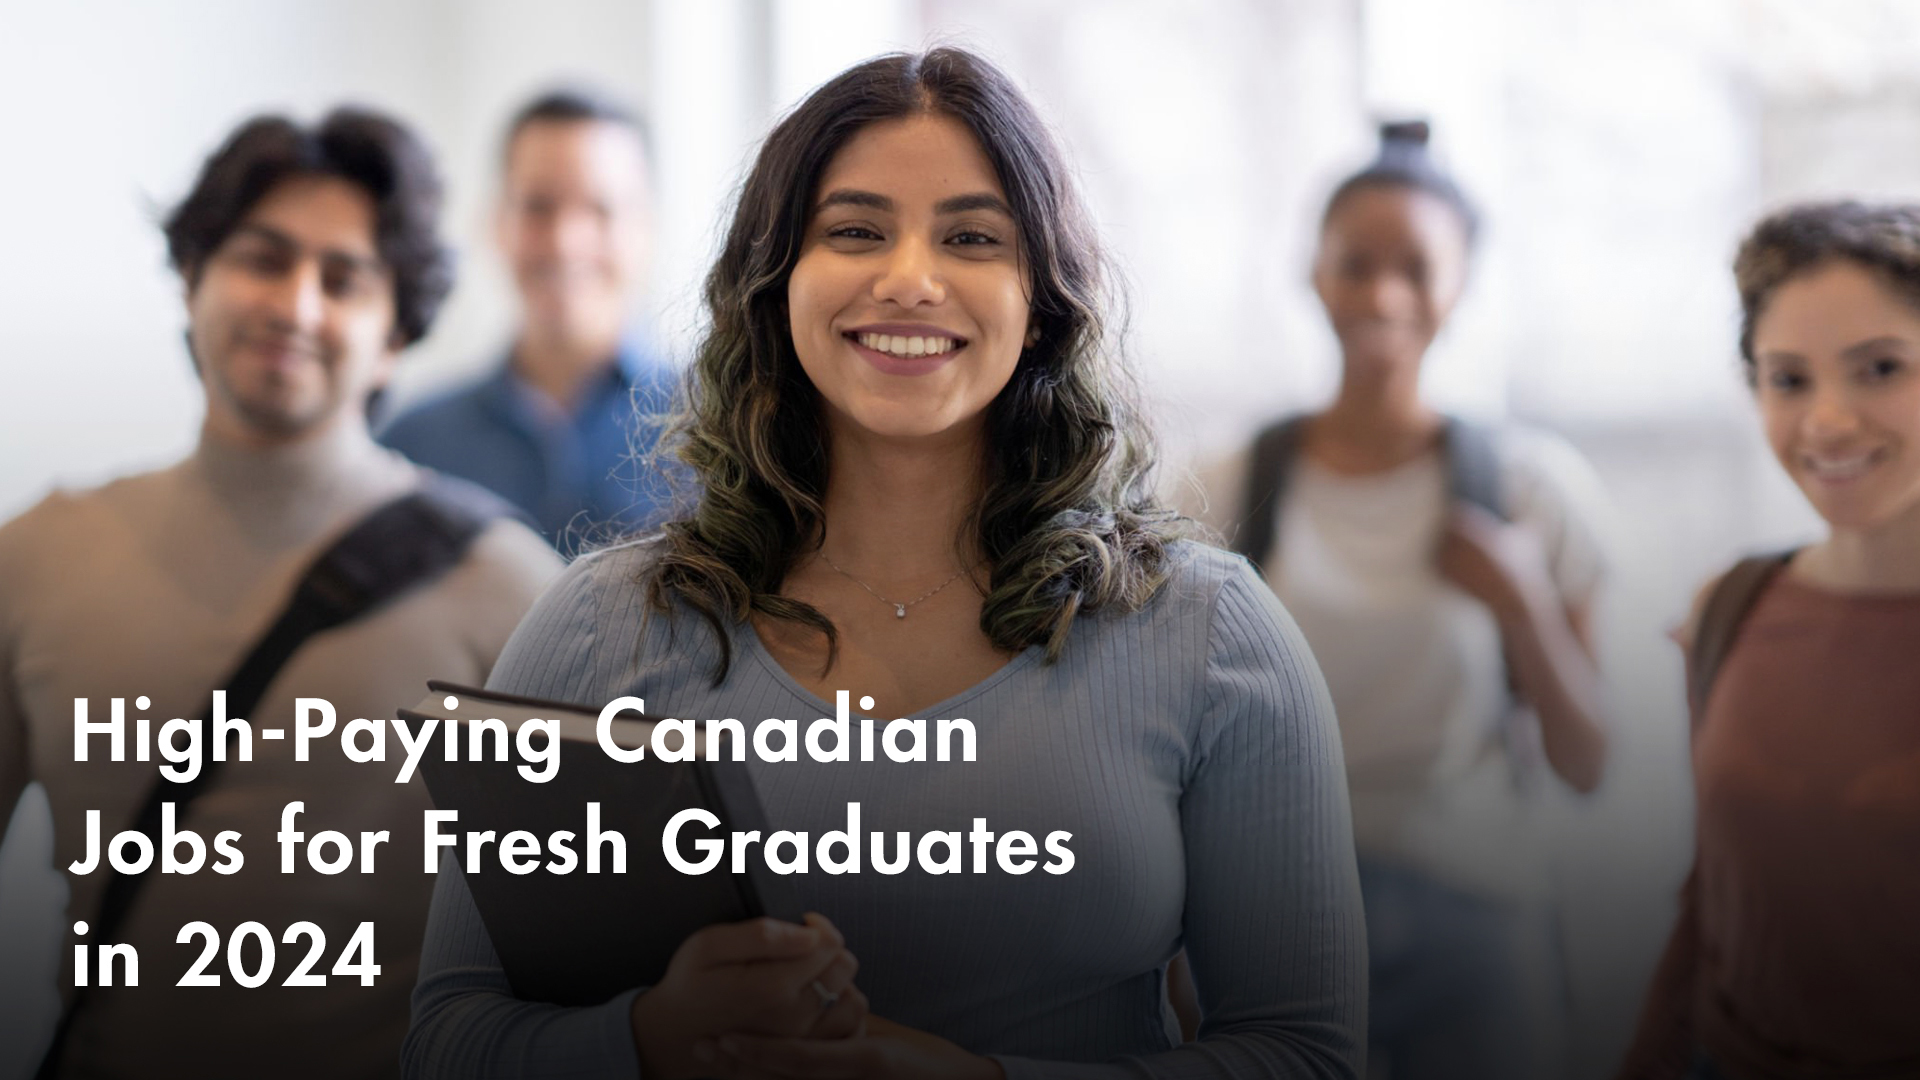 High-Paying Canadian Jobs for Fresh Graduates in 2024